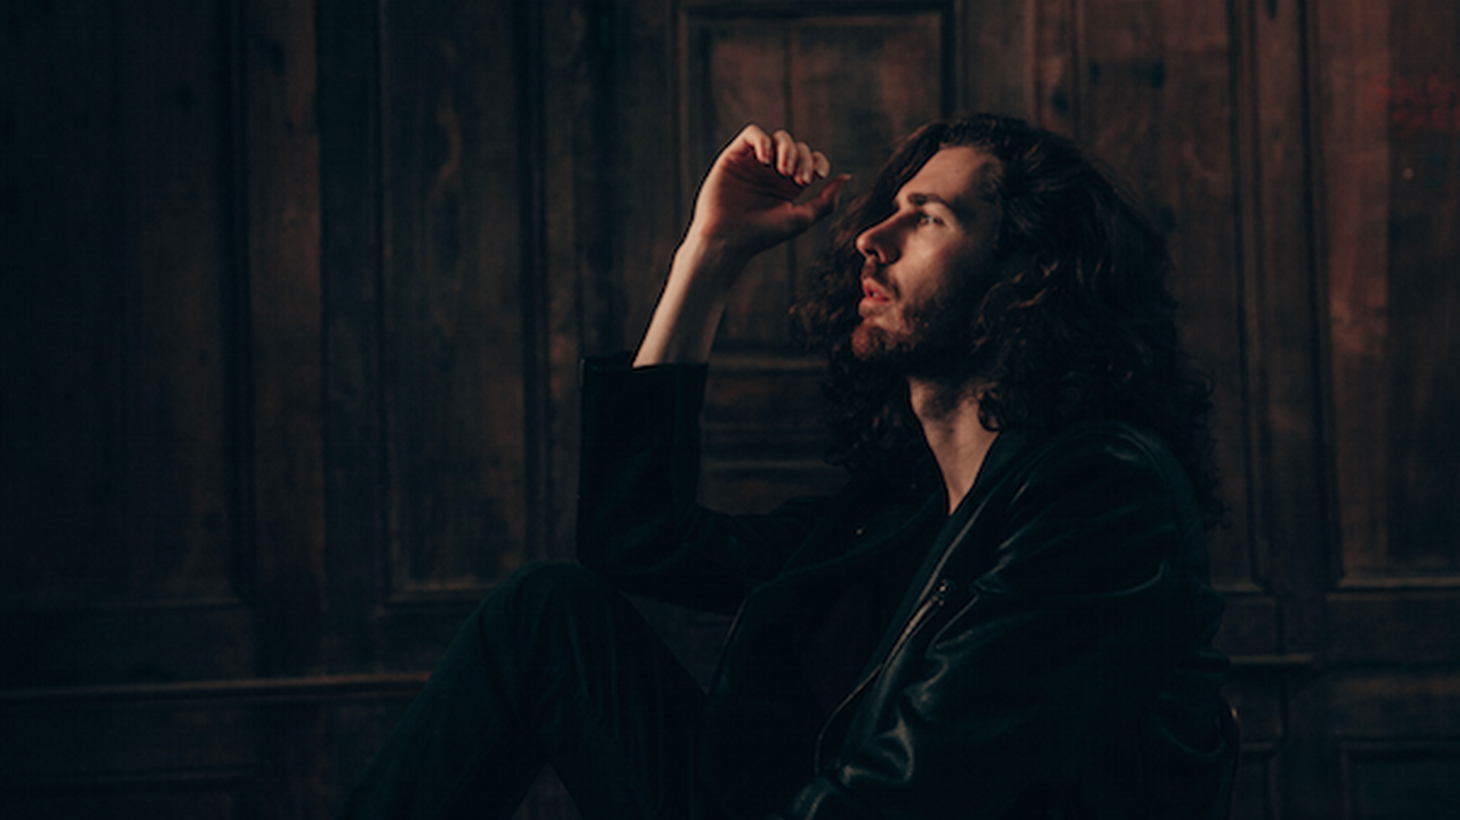 Irish singer Hozier rose quickly to global fame then dropped out of the public eye.